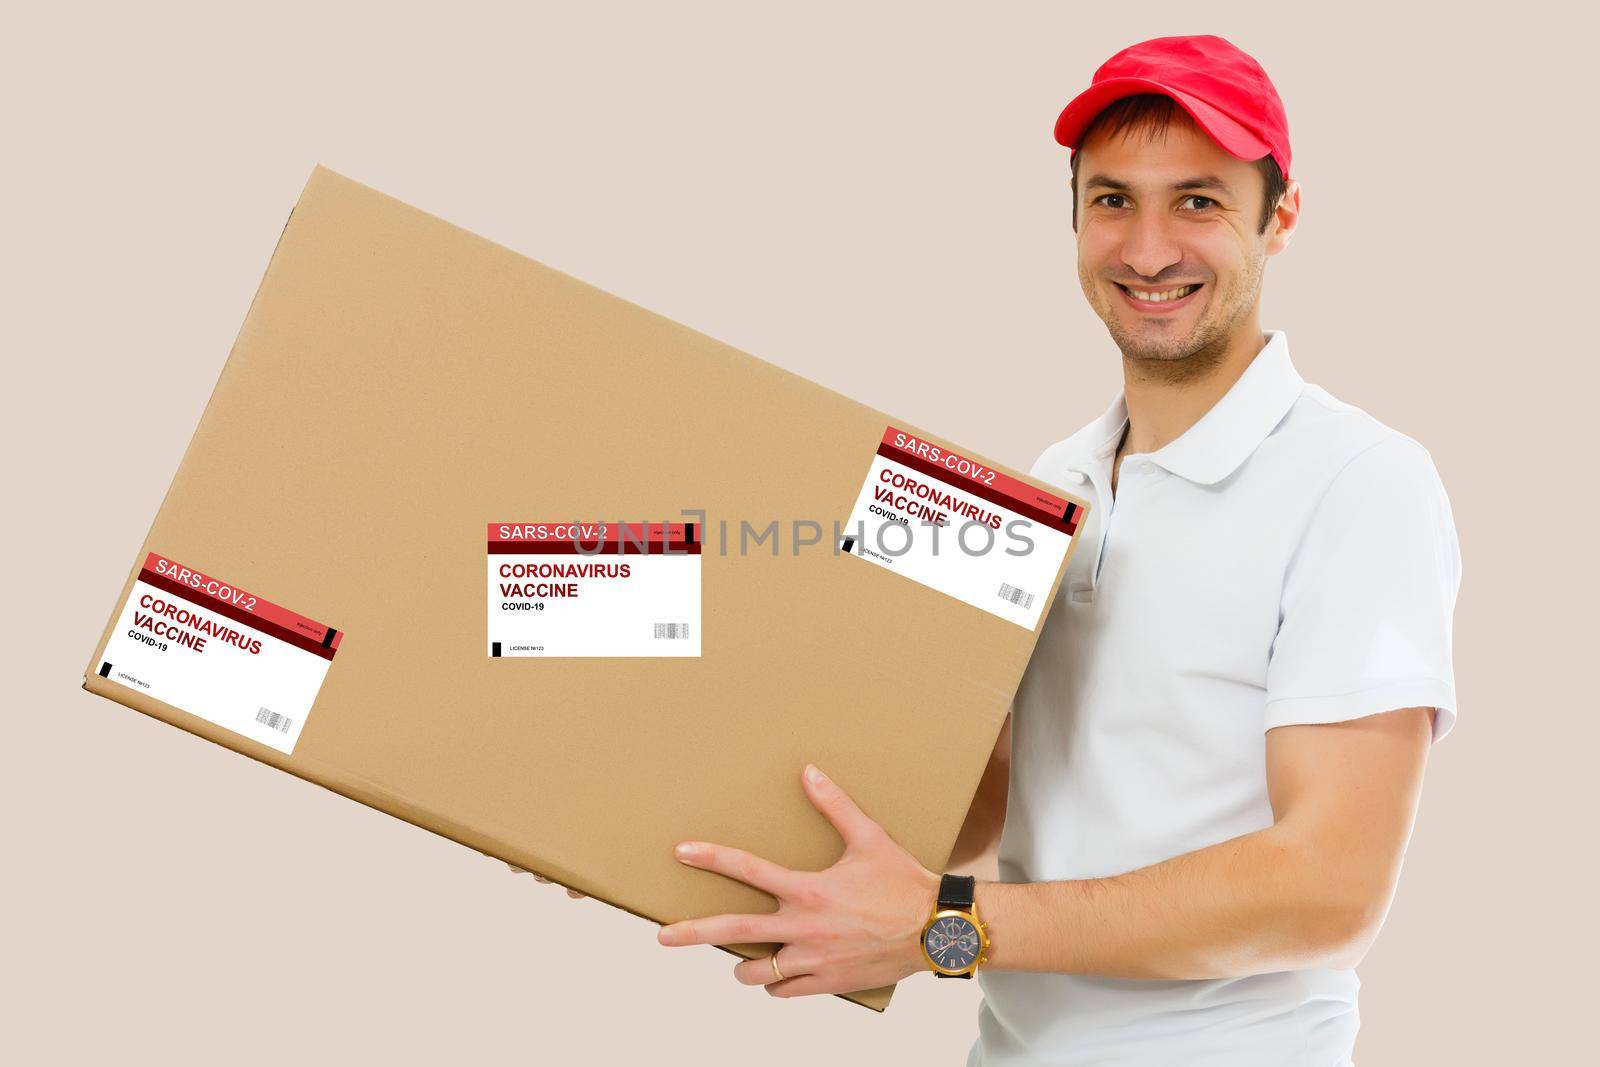 Man holds the vaccine box against white background.